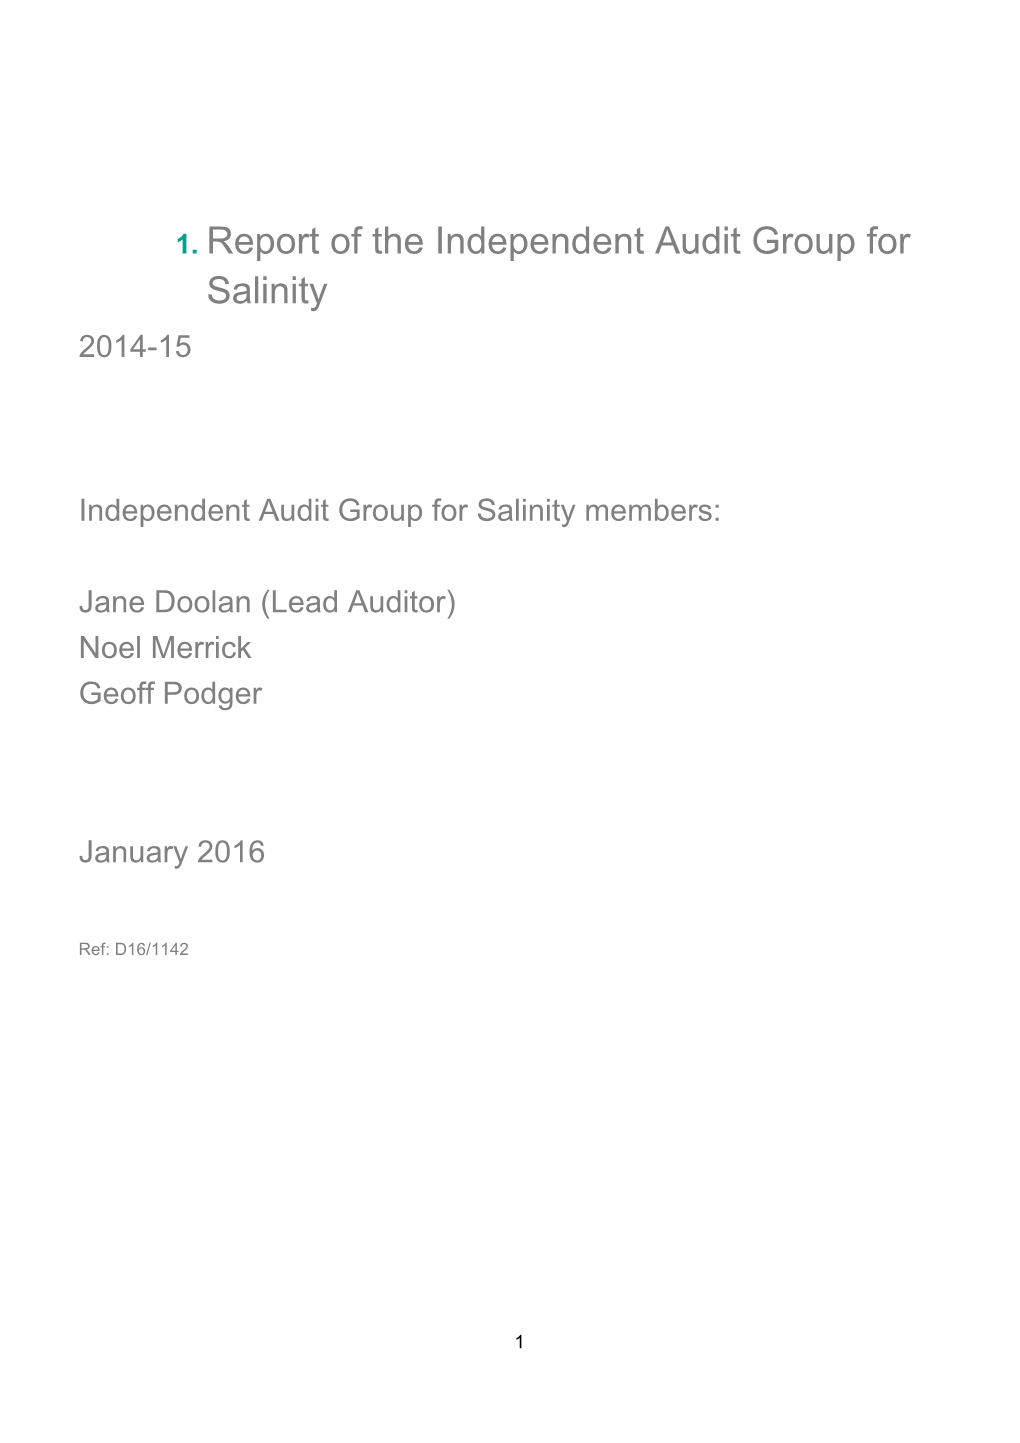 Independent Audit Group - Salinity Report 2014-15